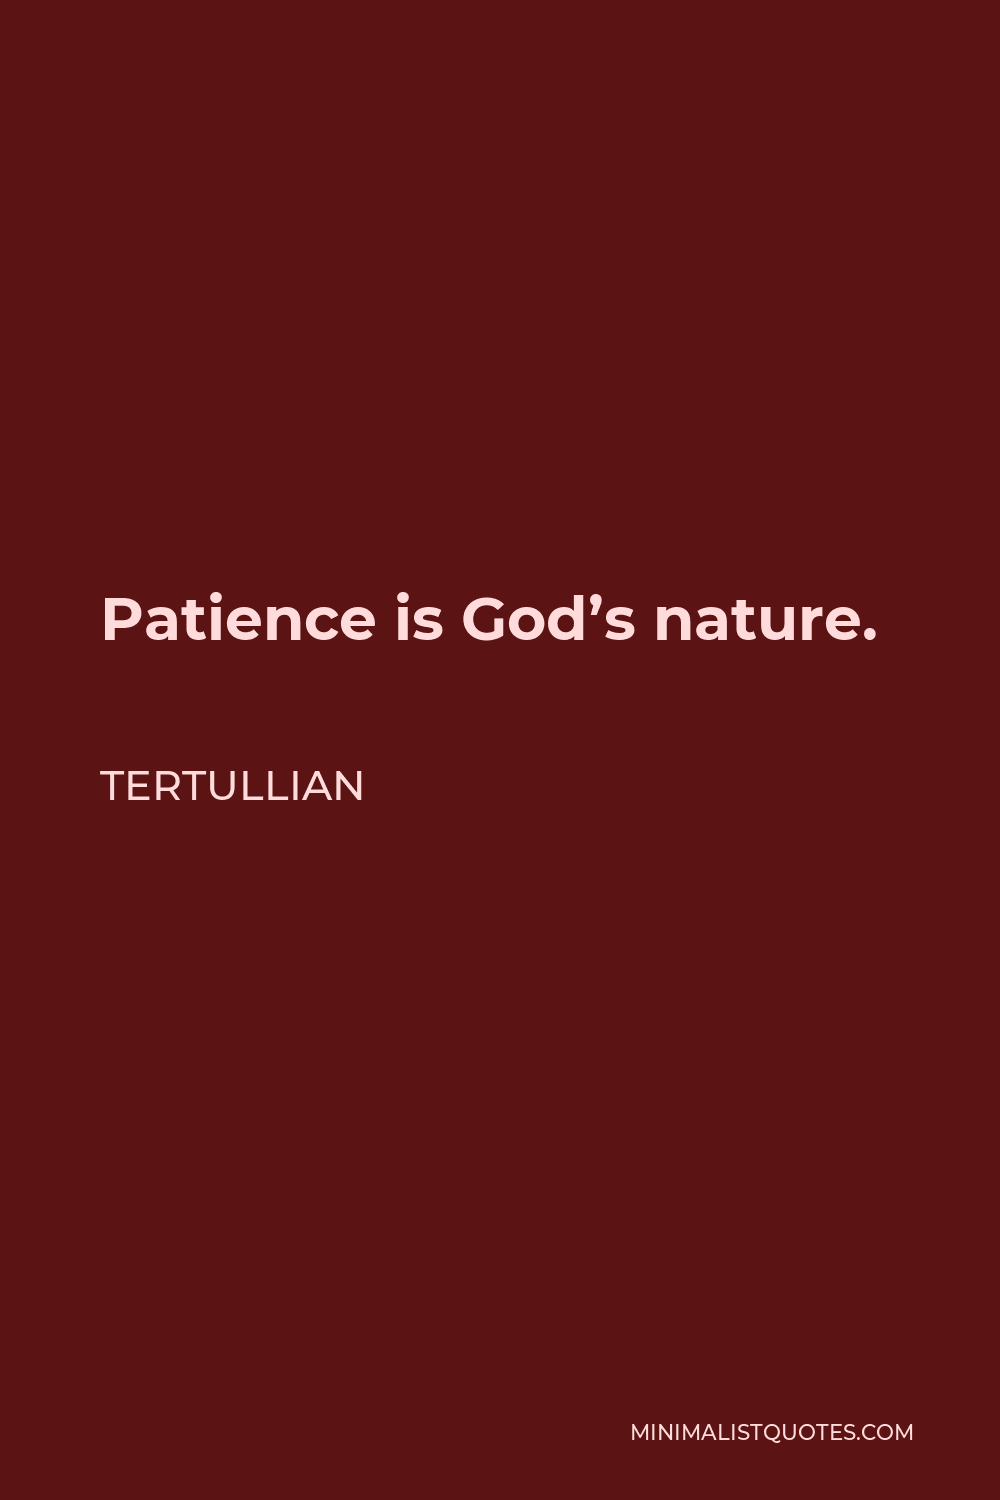 Tertullian Quote - Patience is God’s nature.